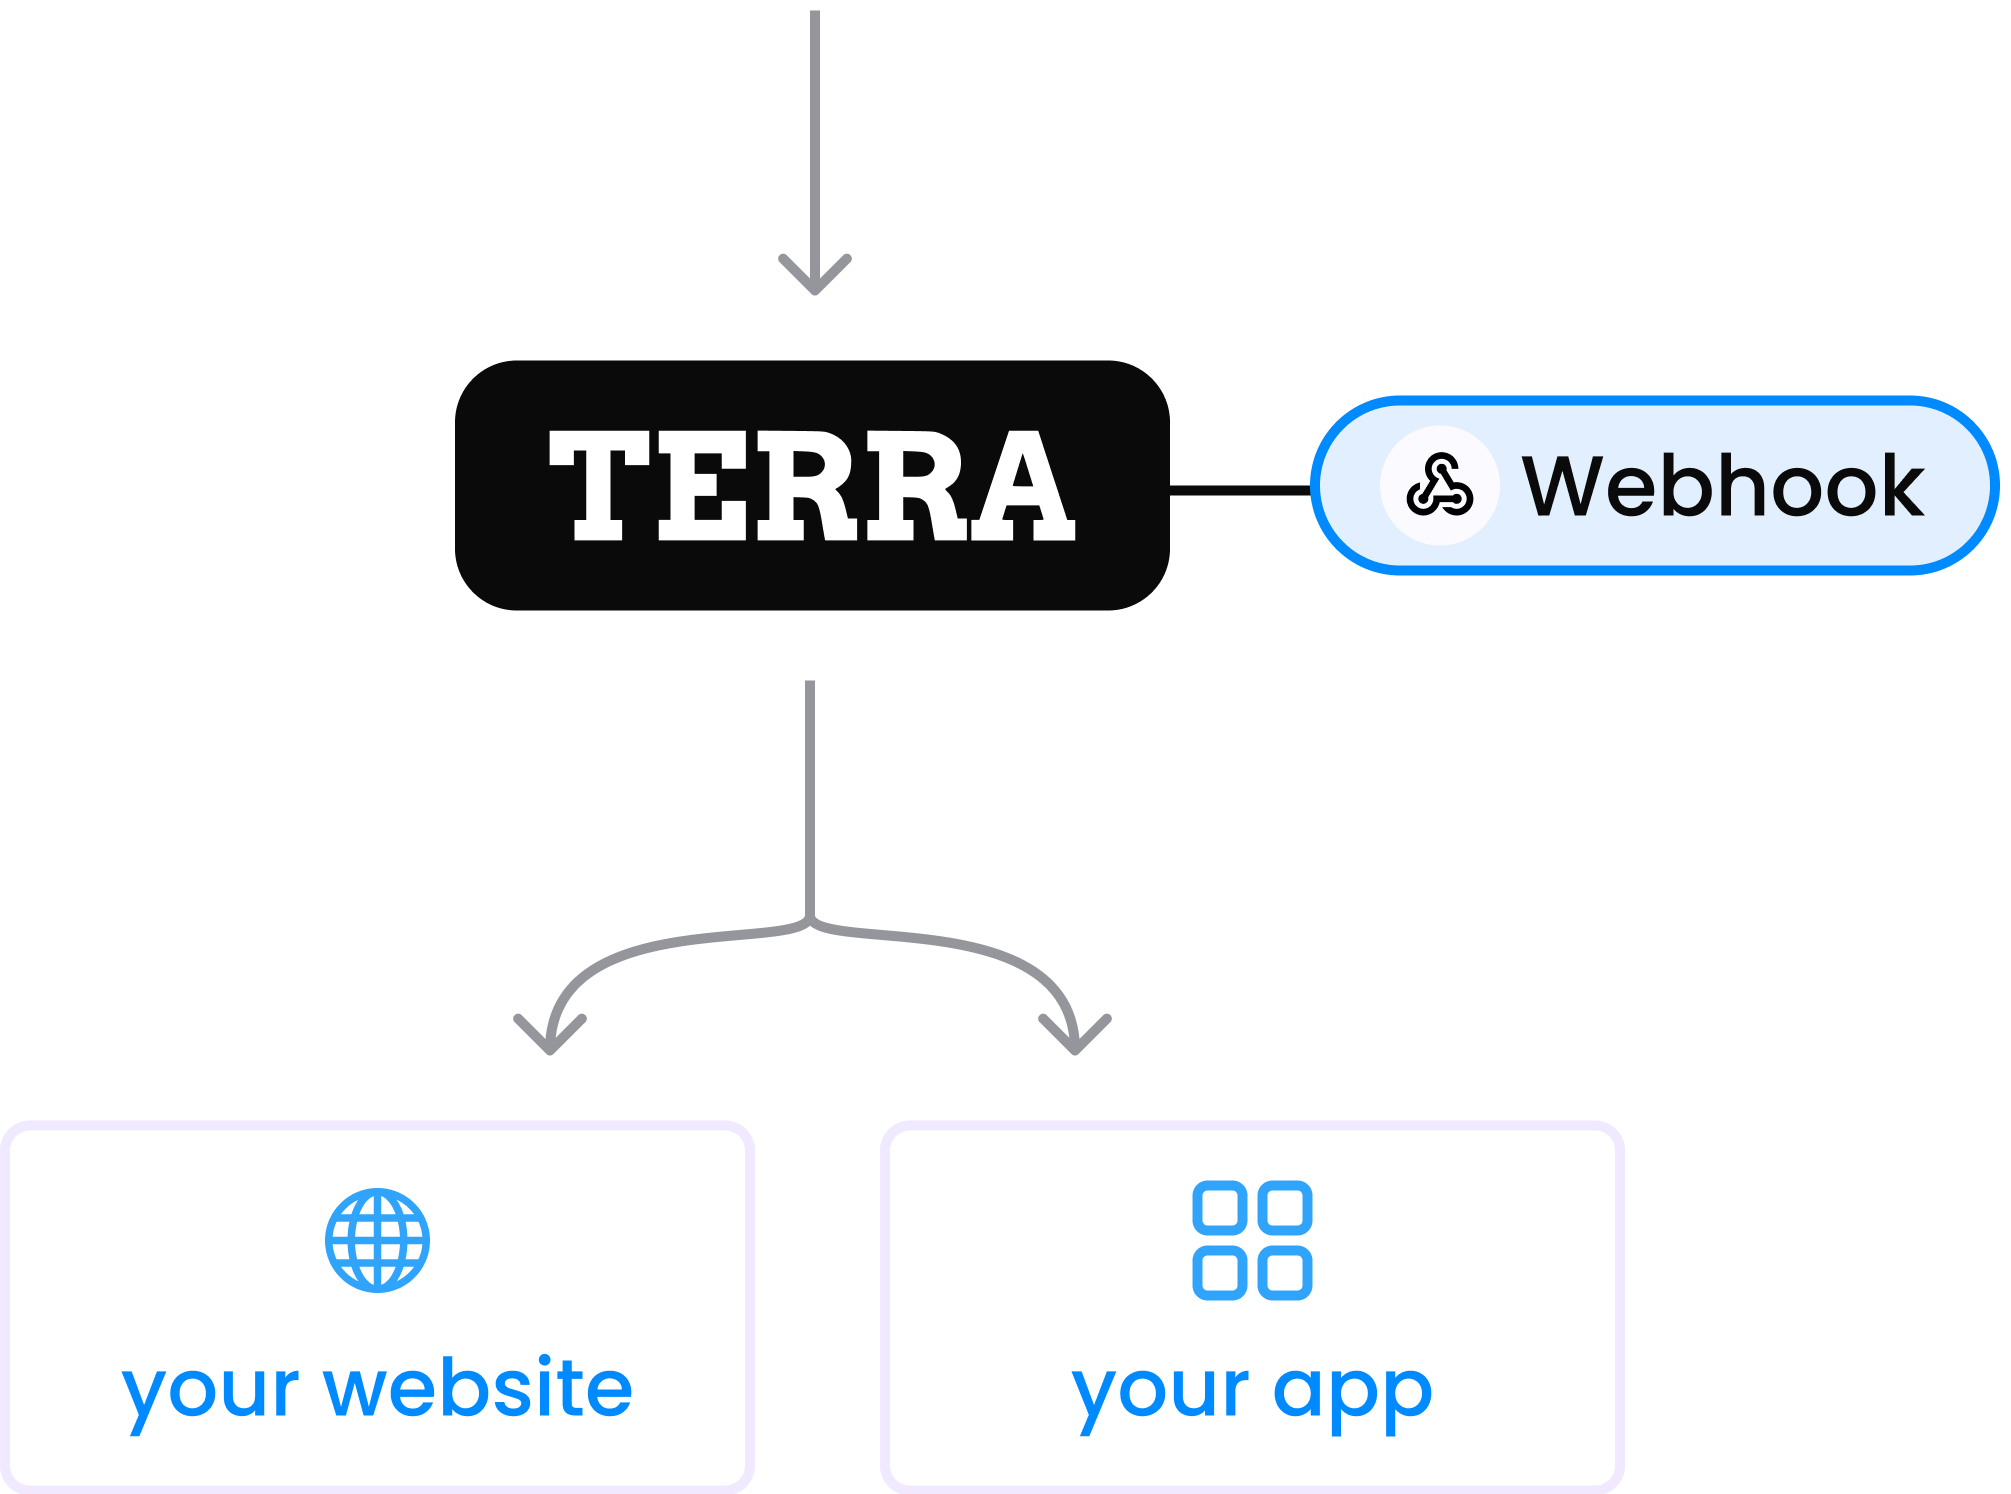 receiving data from coros integration via webhooks to your app or website